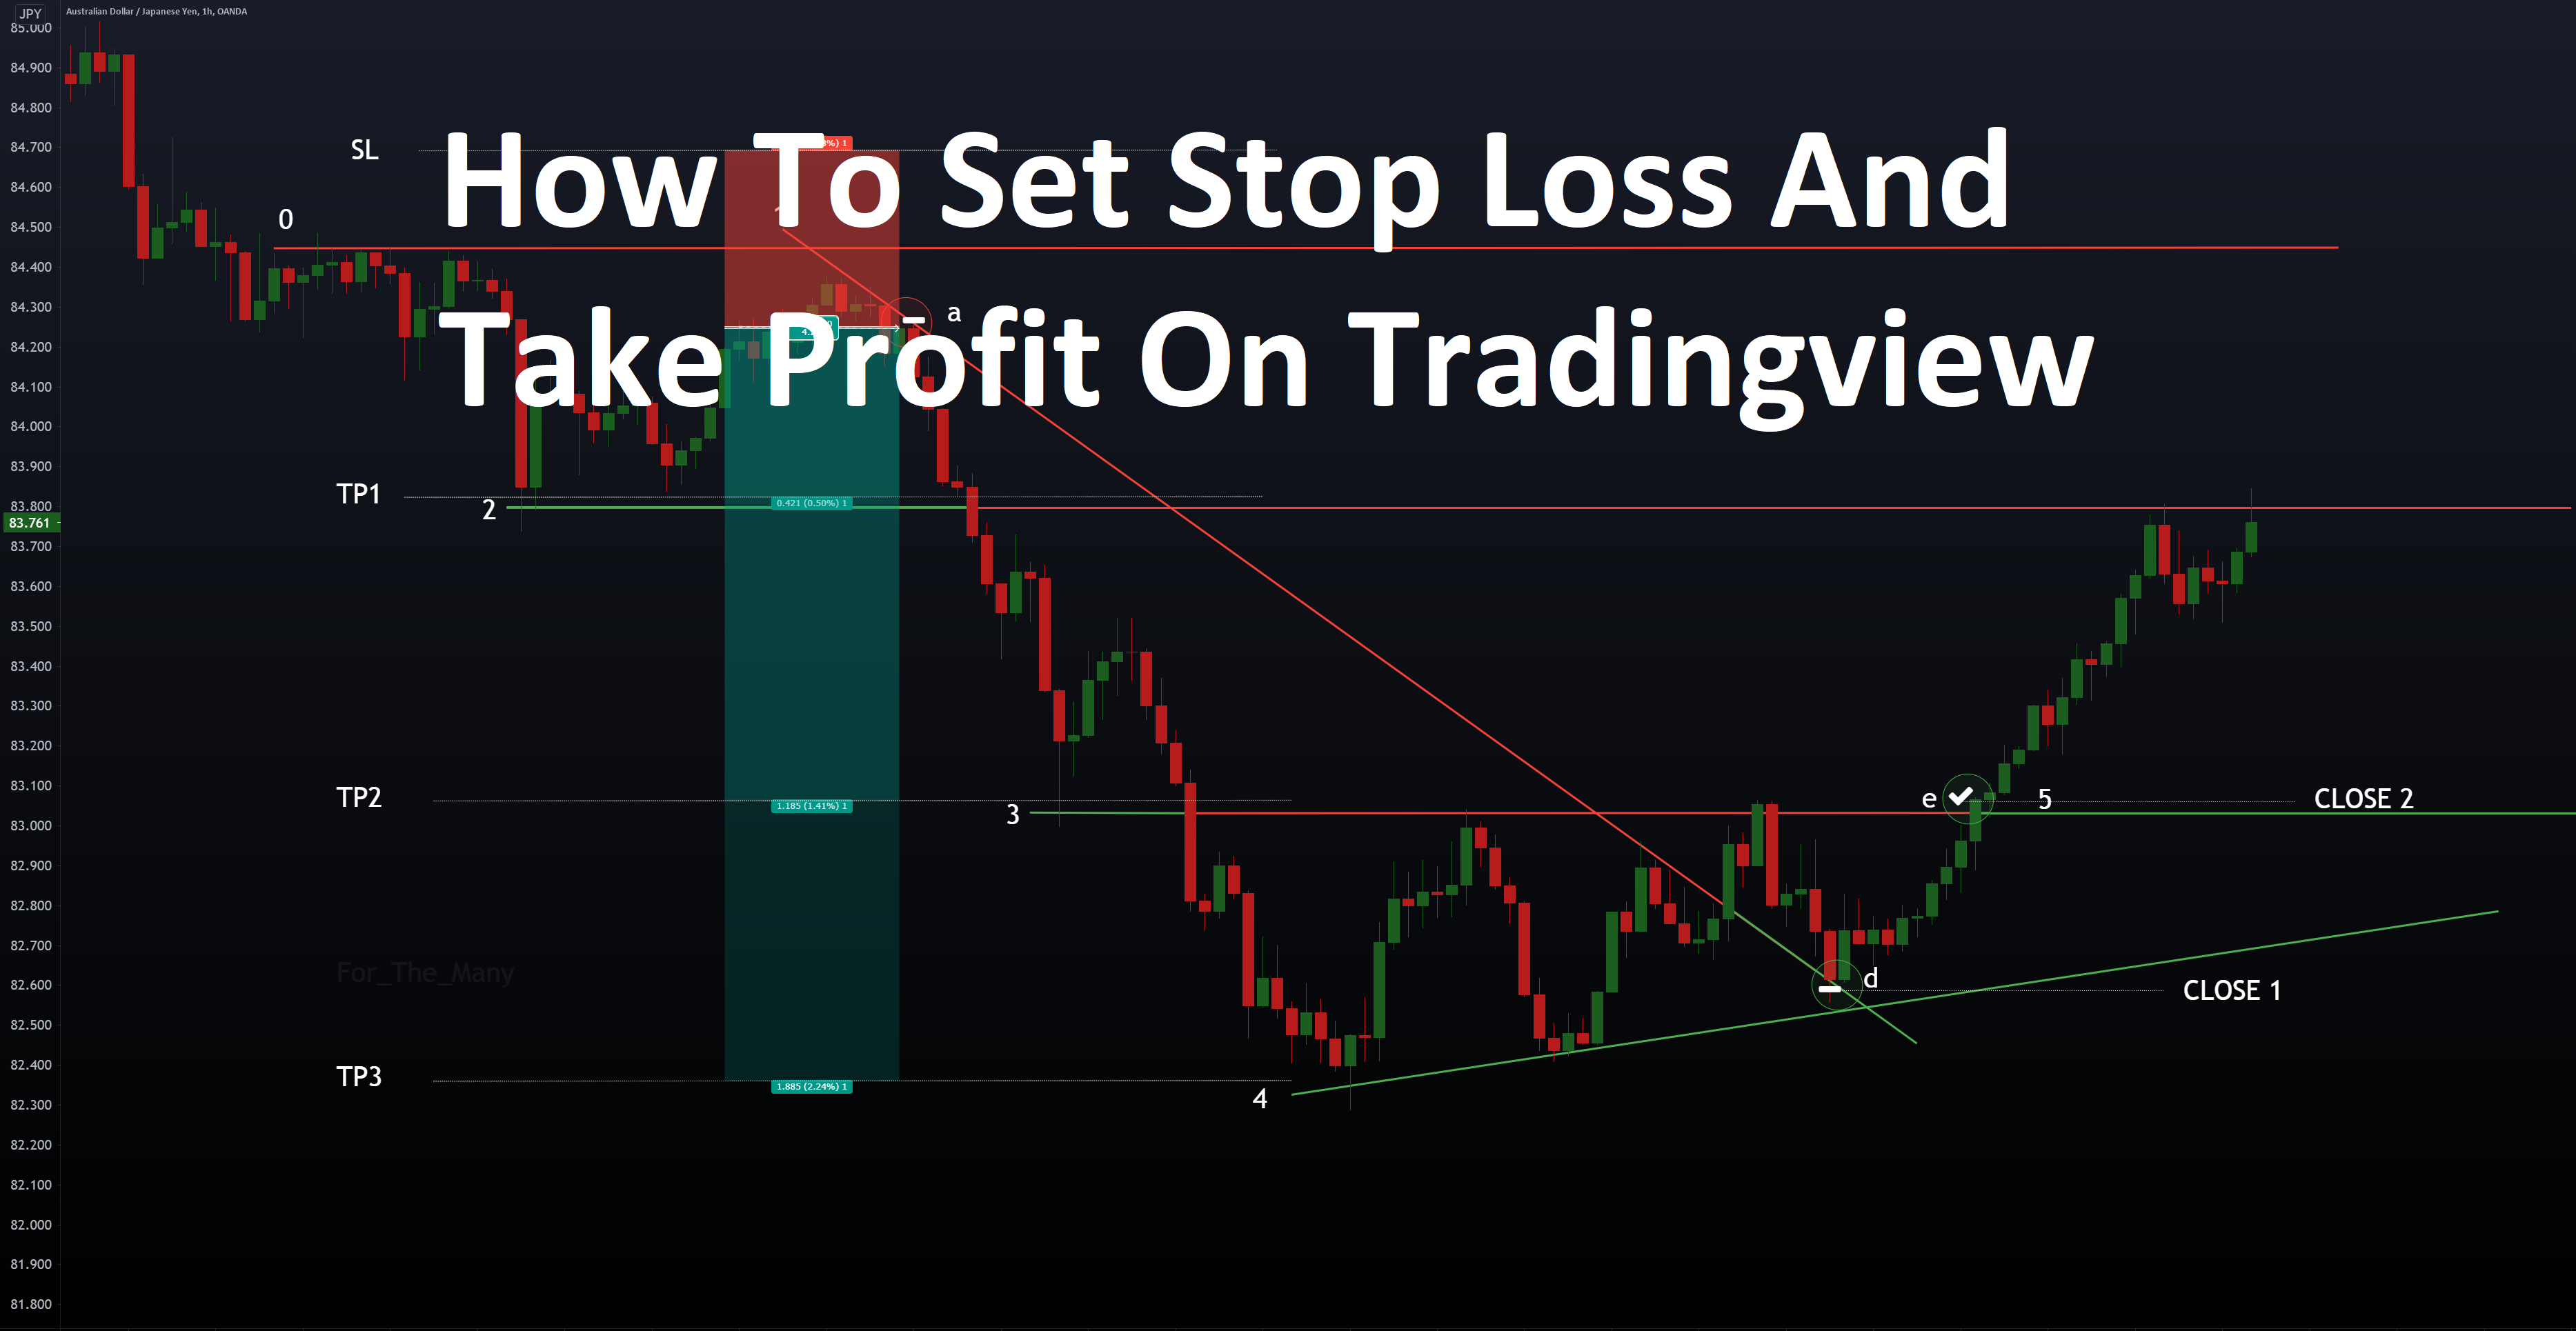 How To Set Stop Loss And Take Profit On Tradingview